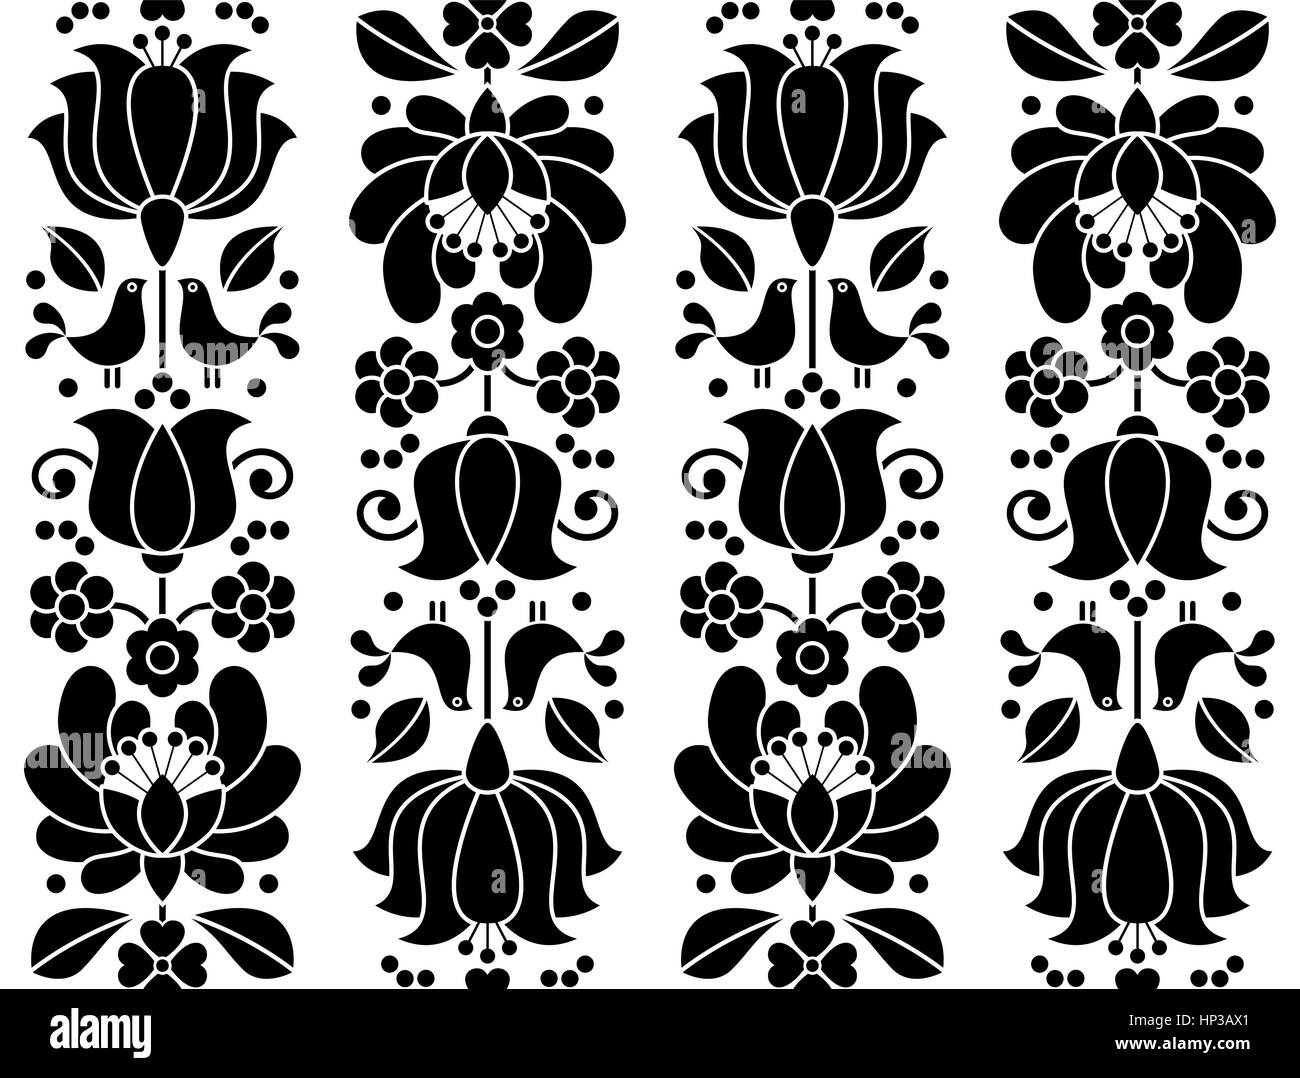 Seamless floral pattern - Kalocsai embroidery - traditional folk design from Hungary Stock Vector